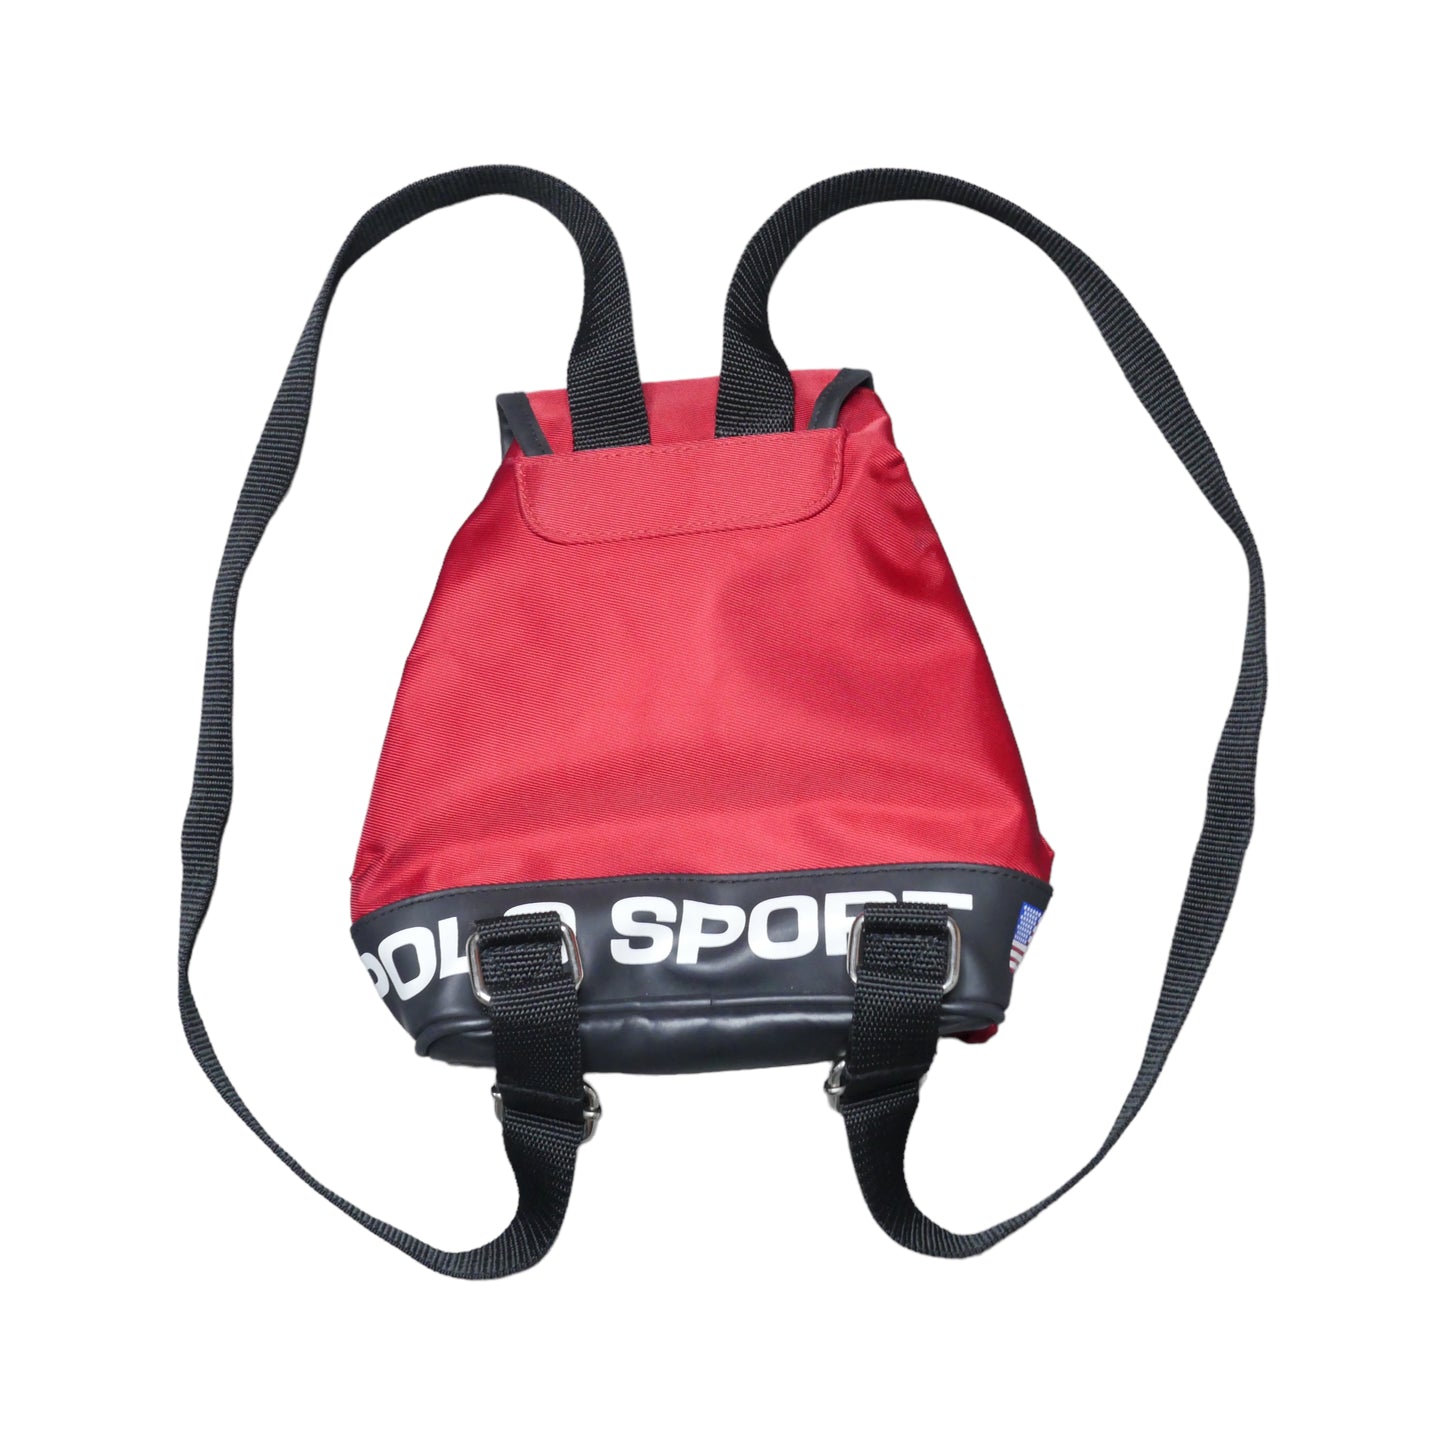 Polo Sport Mini Backpack - Red